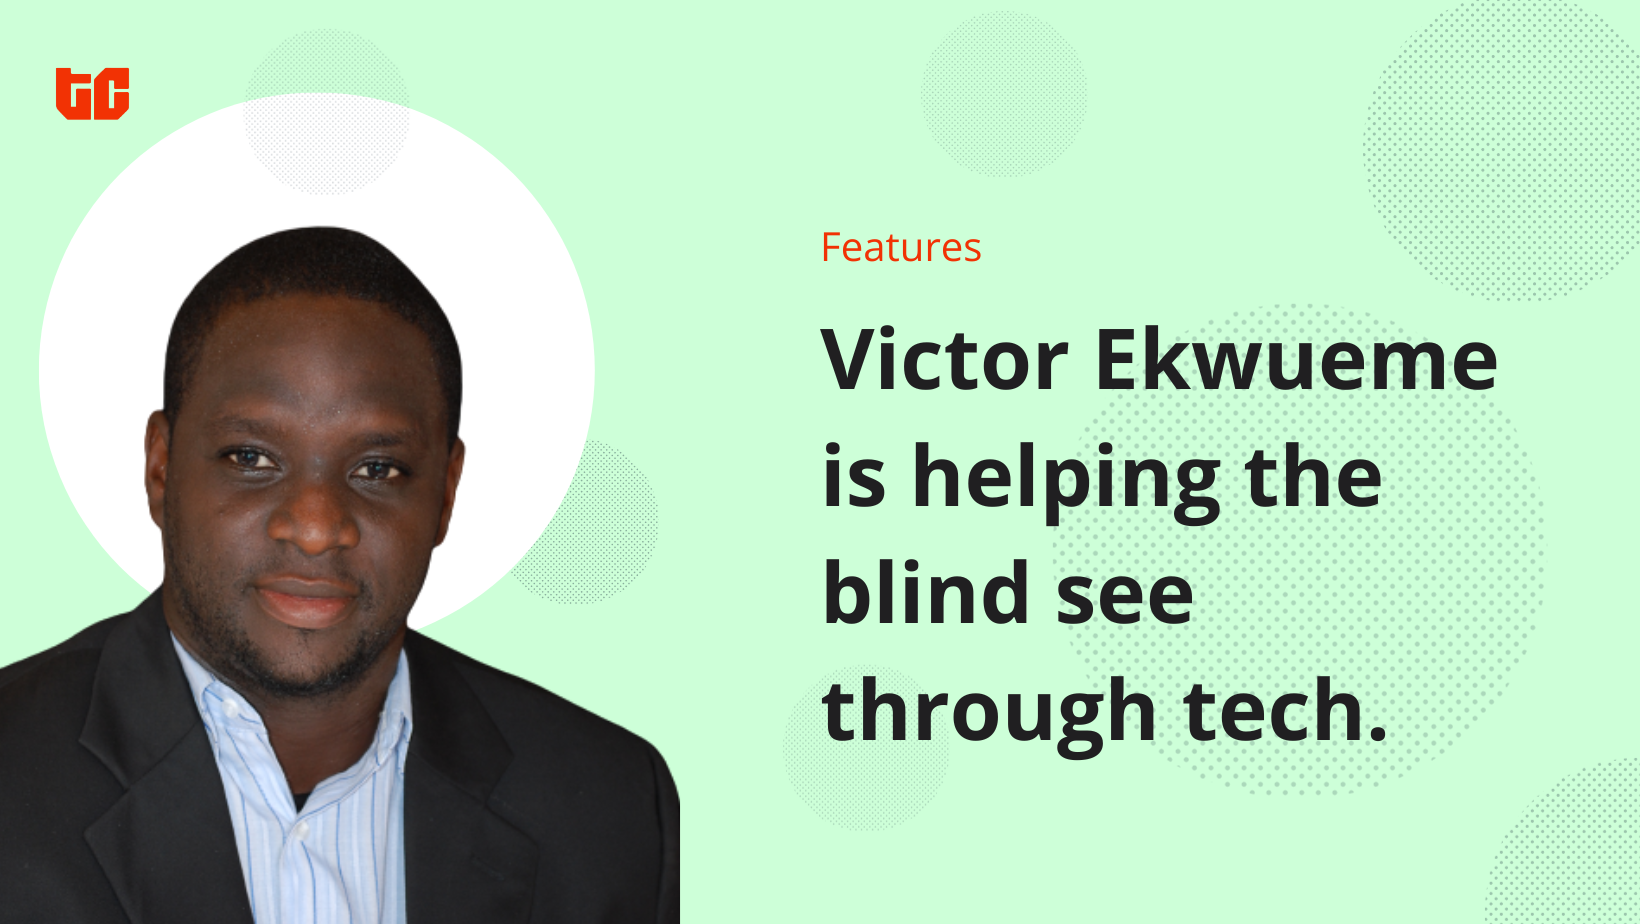 How Victor Ekwueme helps the blind see by tech